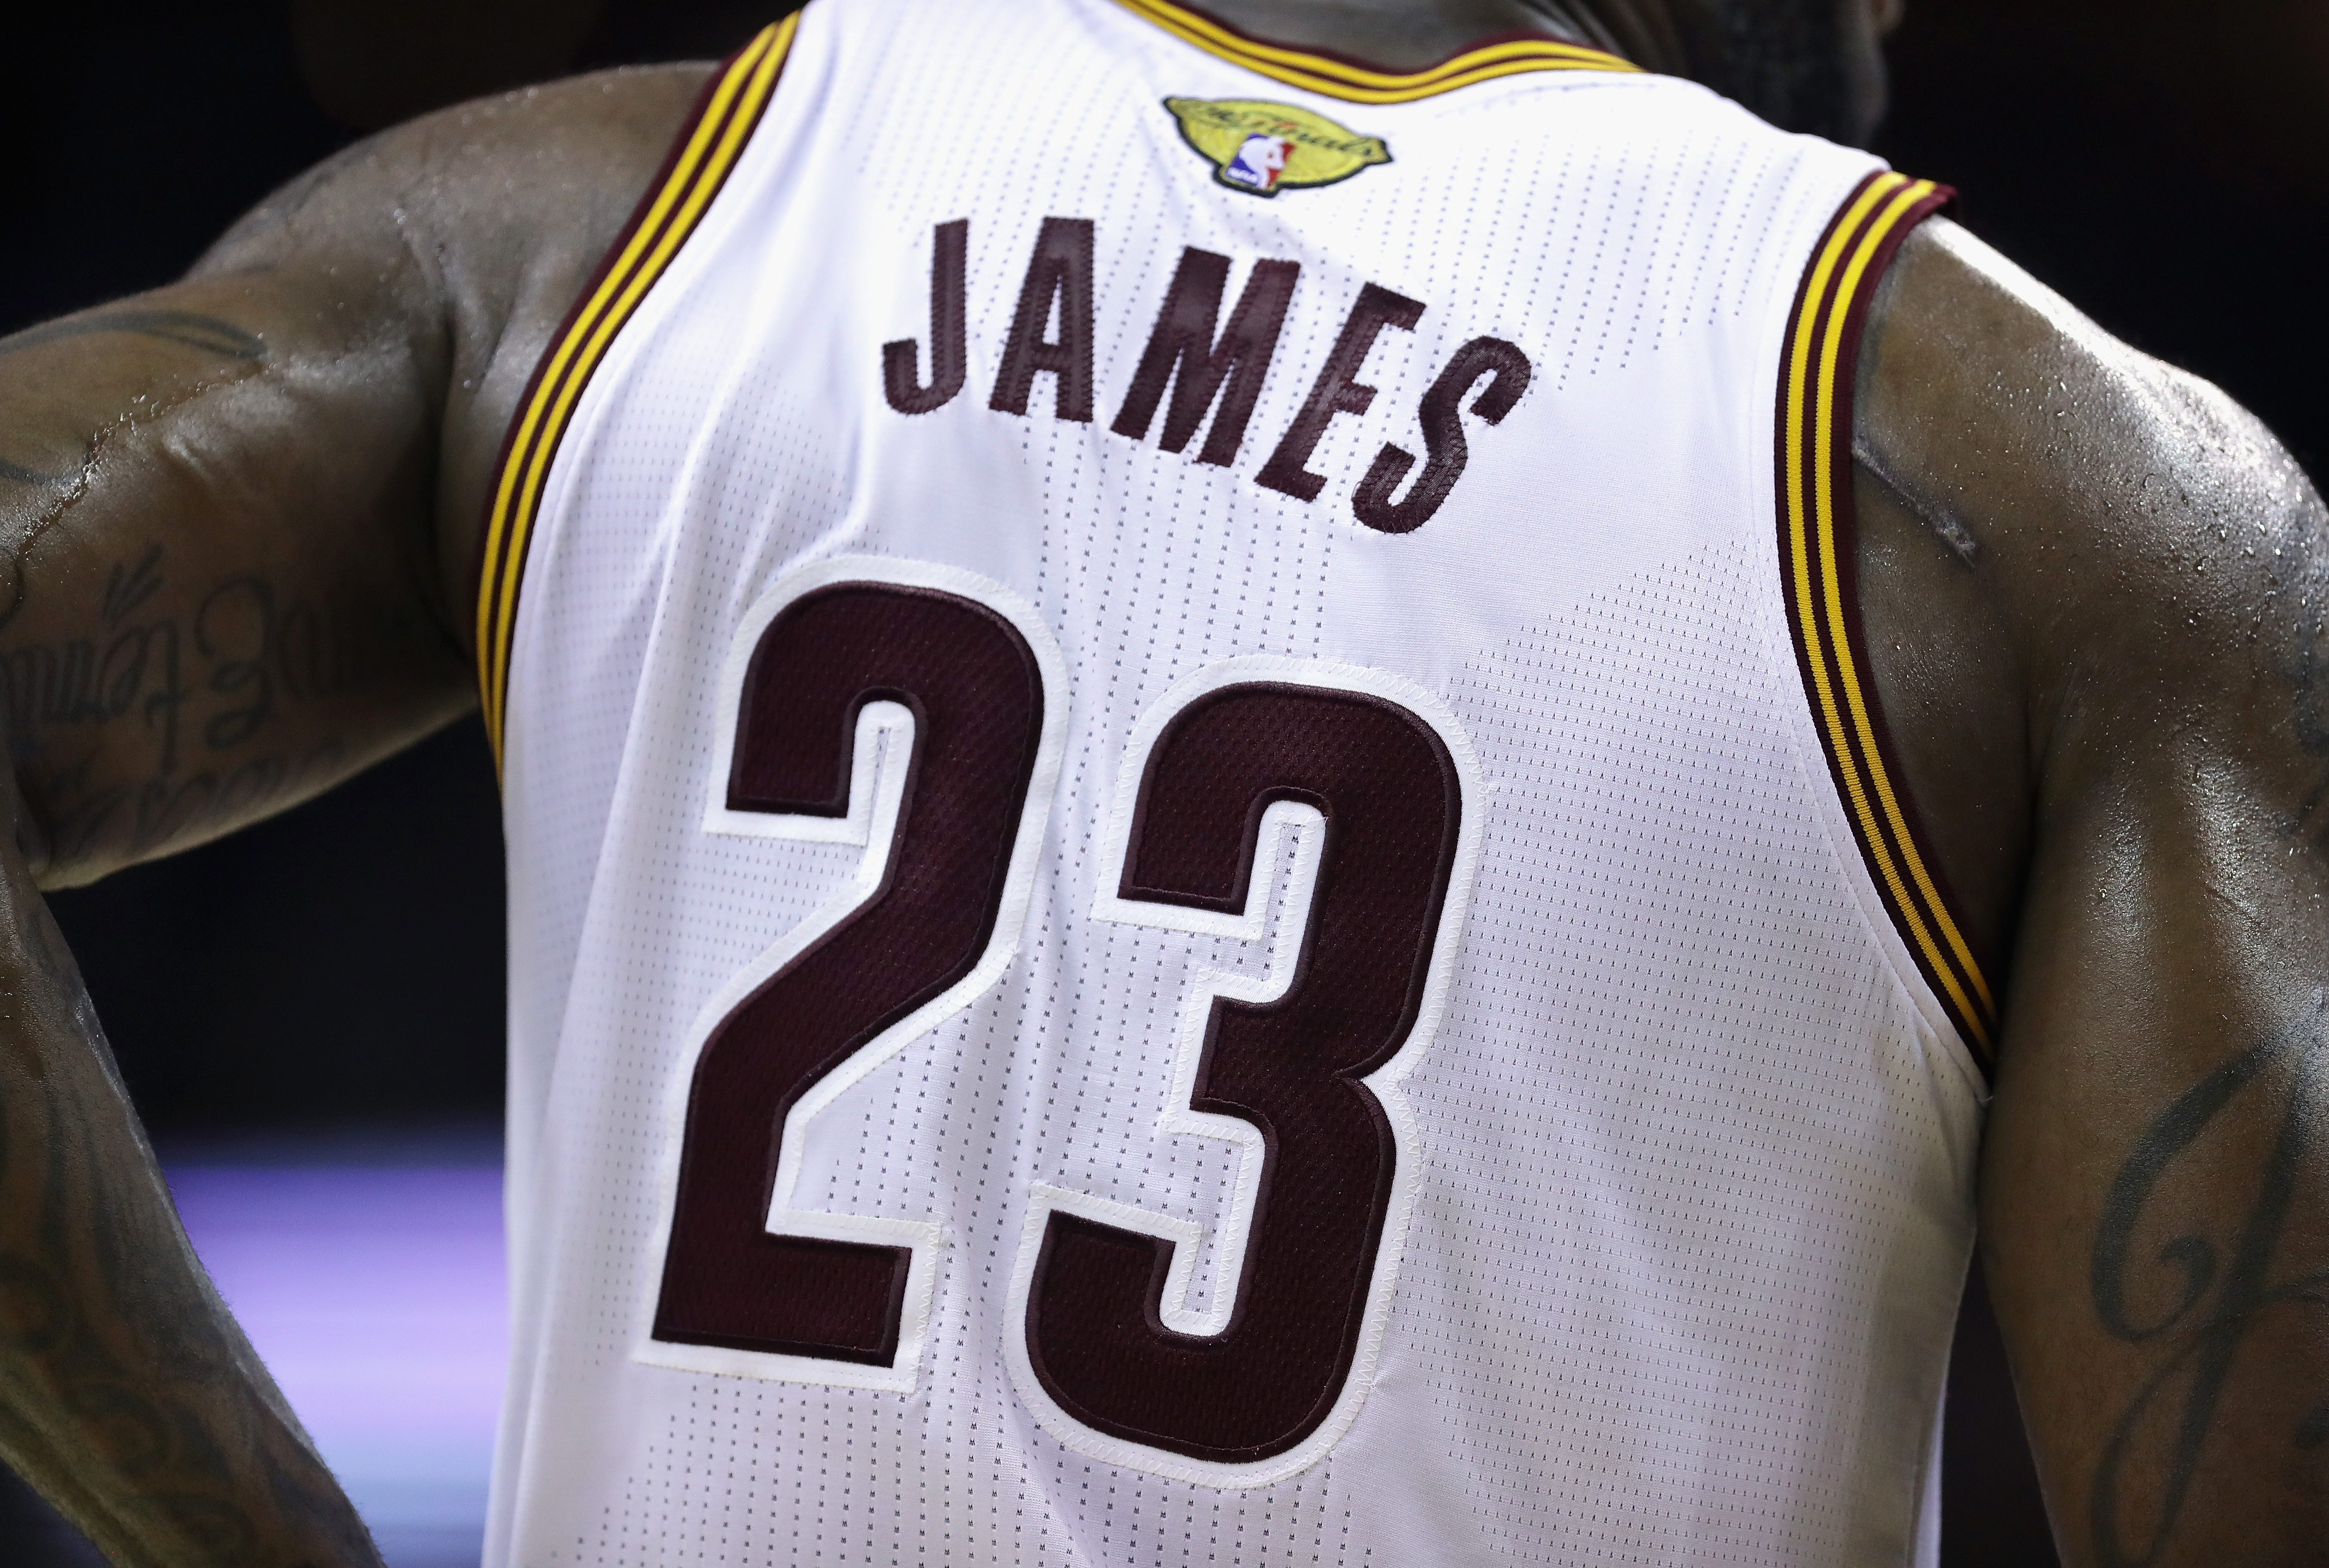 CLEVELAND, OH - JUNE 08: A detail shot of the jersey of LeBron James #23 of the Cleveland Cavaliers during the second half against the Golden State Warriors in Game 3 of the 2016 NBA Finals at Quicken Loans Arena on June 8, 2016 in Cleveland, Ohio. NOTE TO USER: User expressly acknowledges and agrees that, by downloading and or using this photograph, User is consenting to the terms and conditions of the Getty Images License Agreement.   Ronald Martinez/Getty Images/AFP